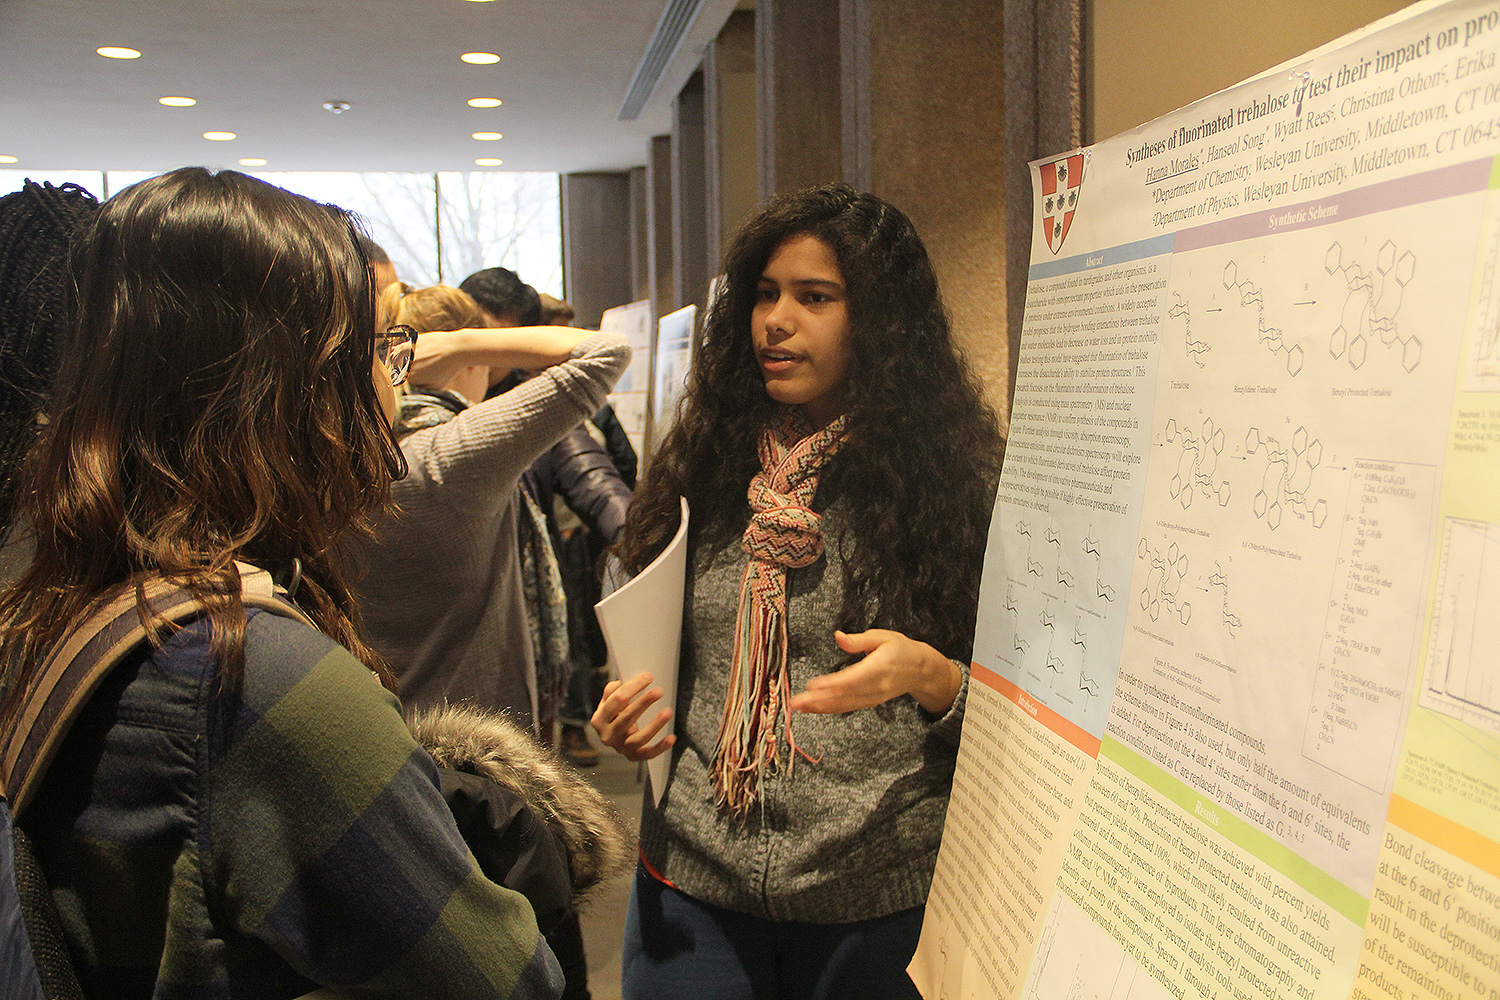 Hannah Morales '17 discusses her group’s research on “Syntheses of fluorinated trehalose to test their impact on protein stability.” The research is a collaboration between the Department of Physics and Department of Chemistry. 